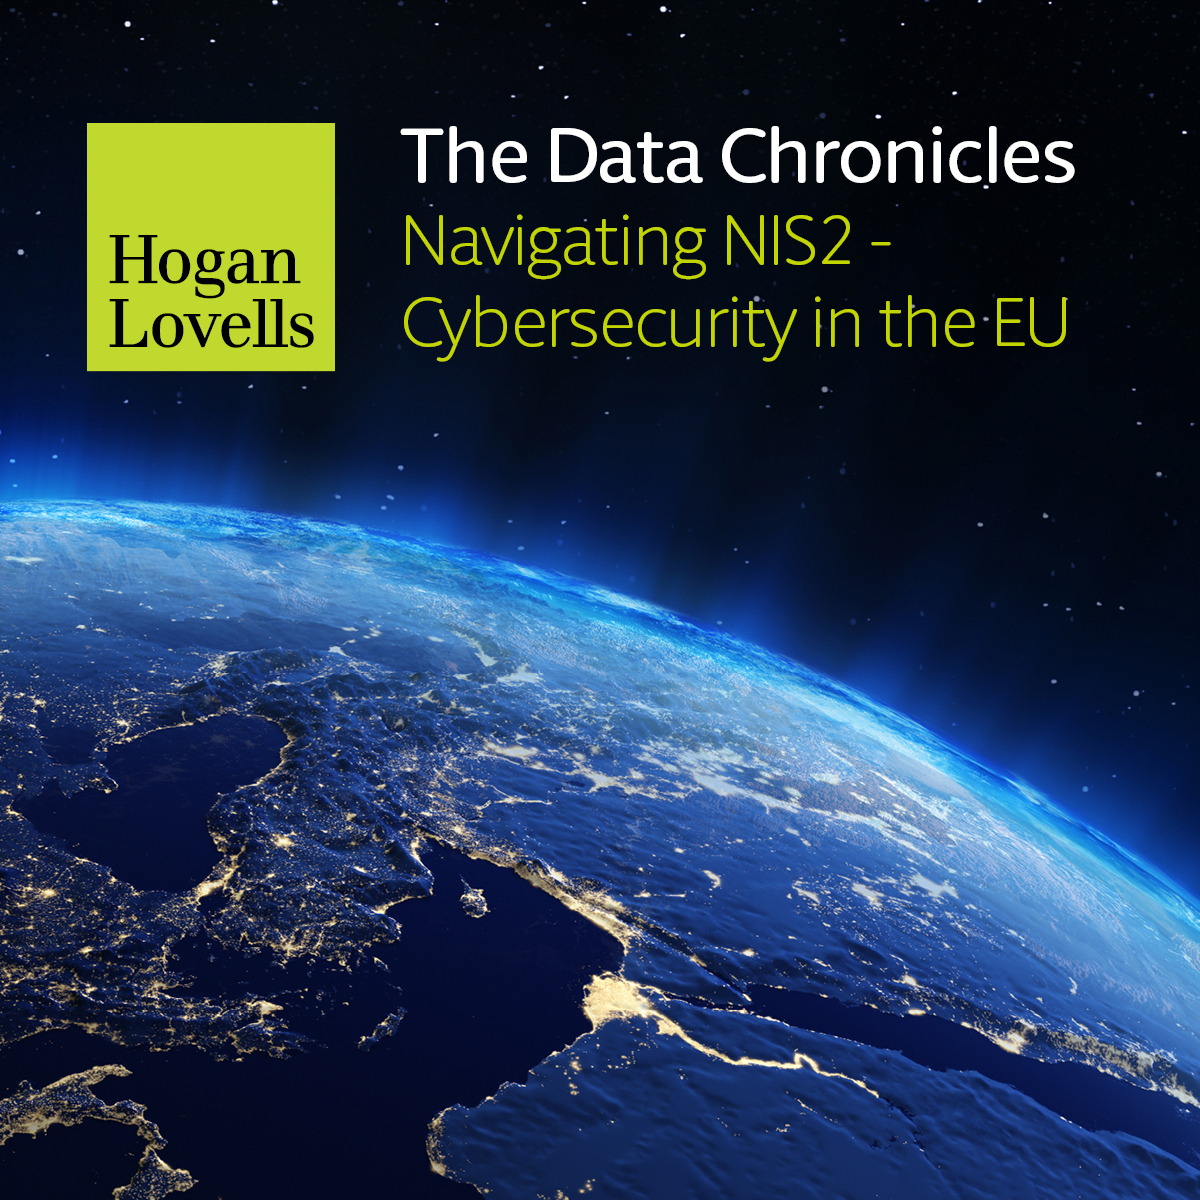 The Data Chronicles_Navigating NIS2 Cybersecurity in the EU